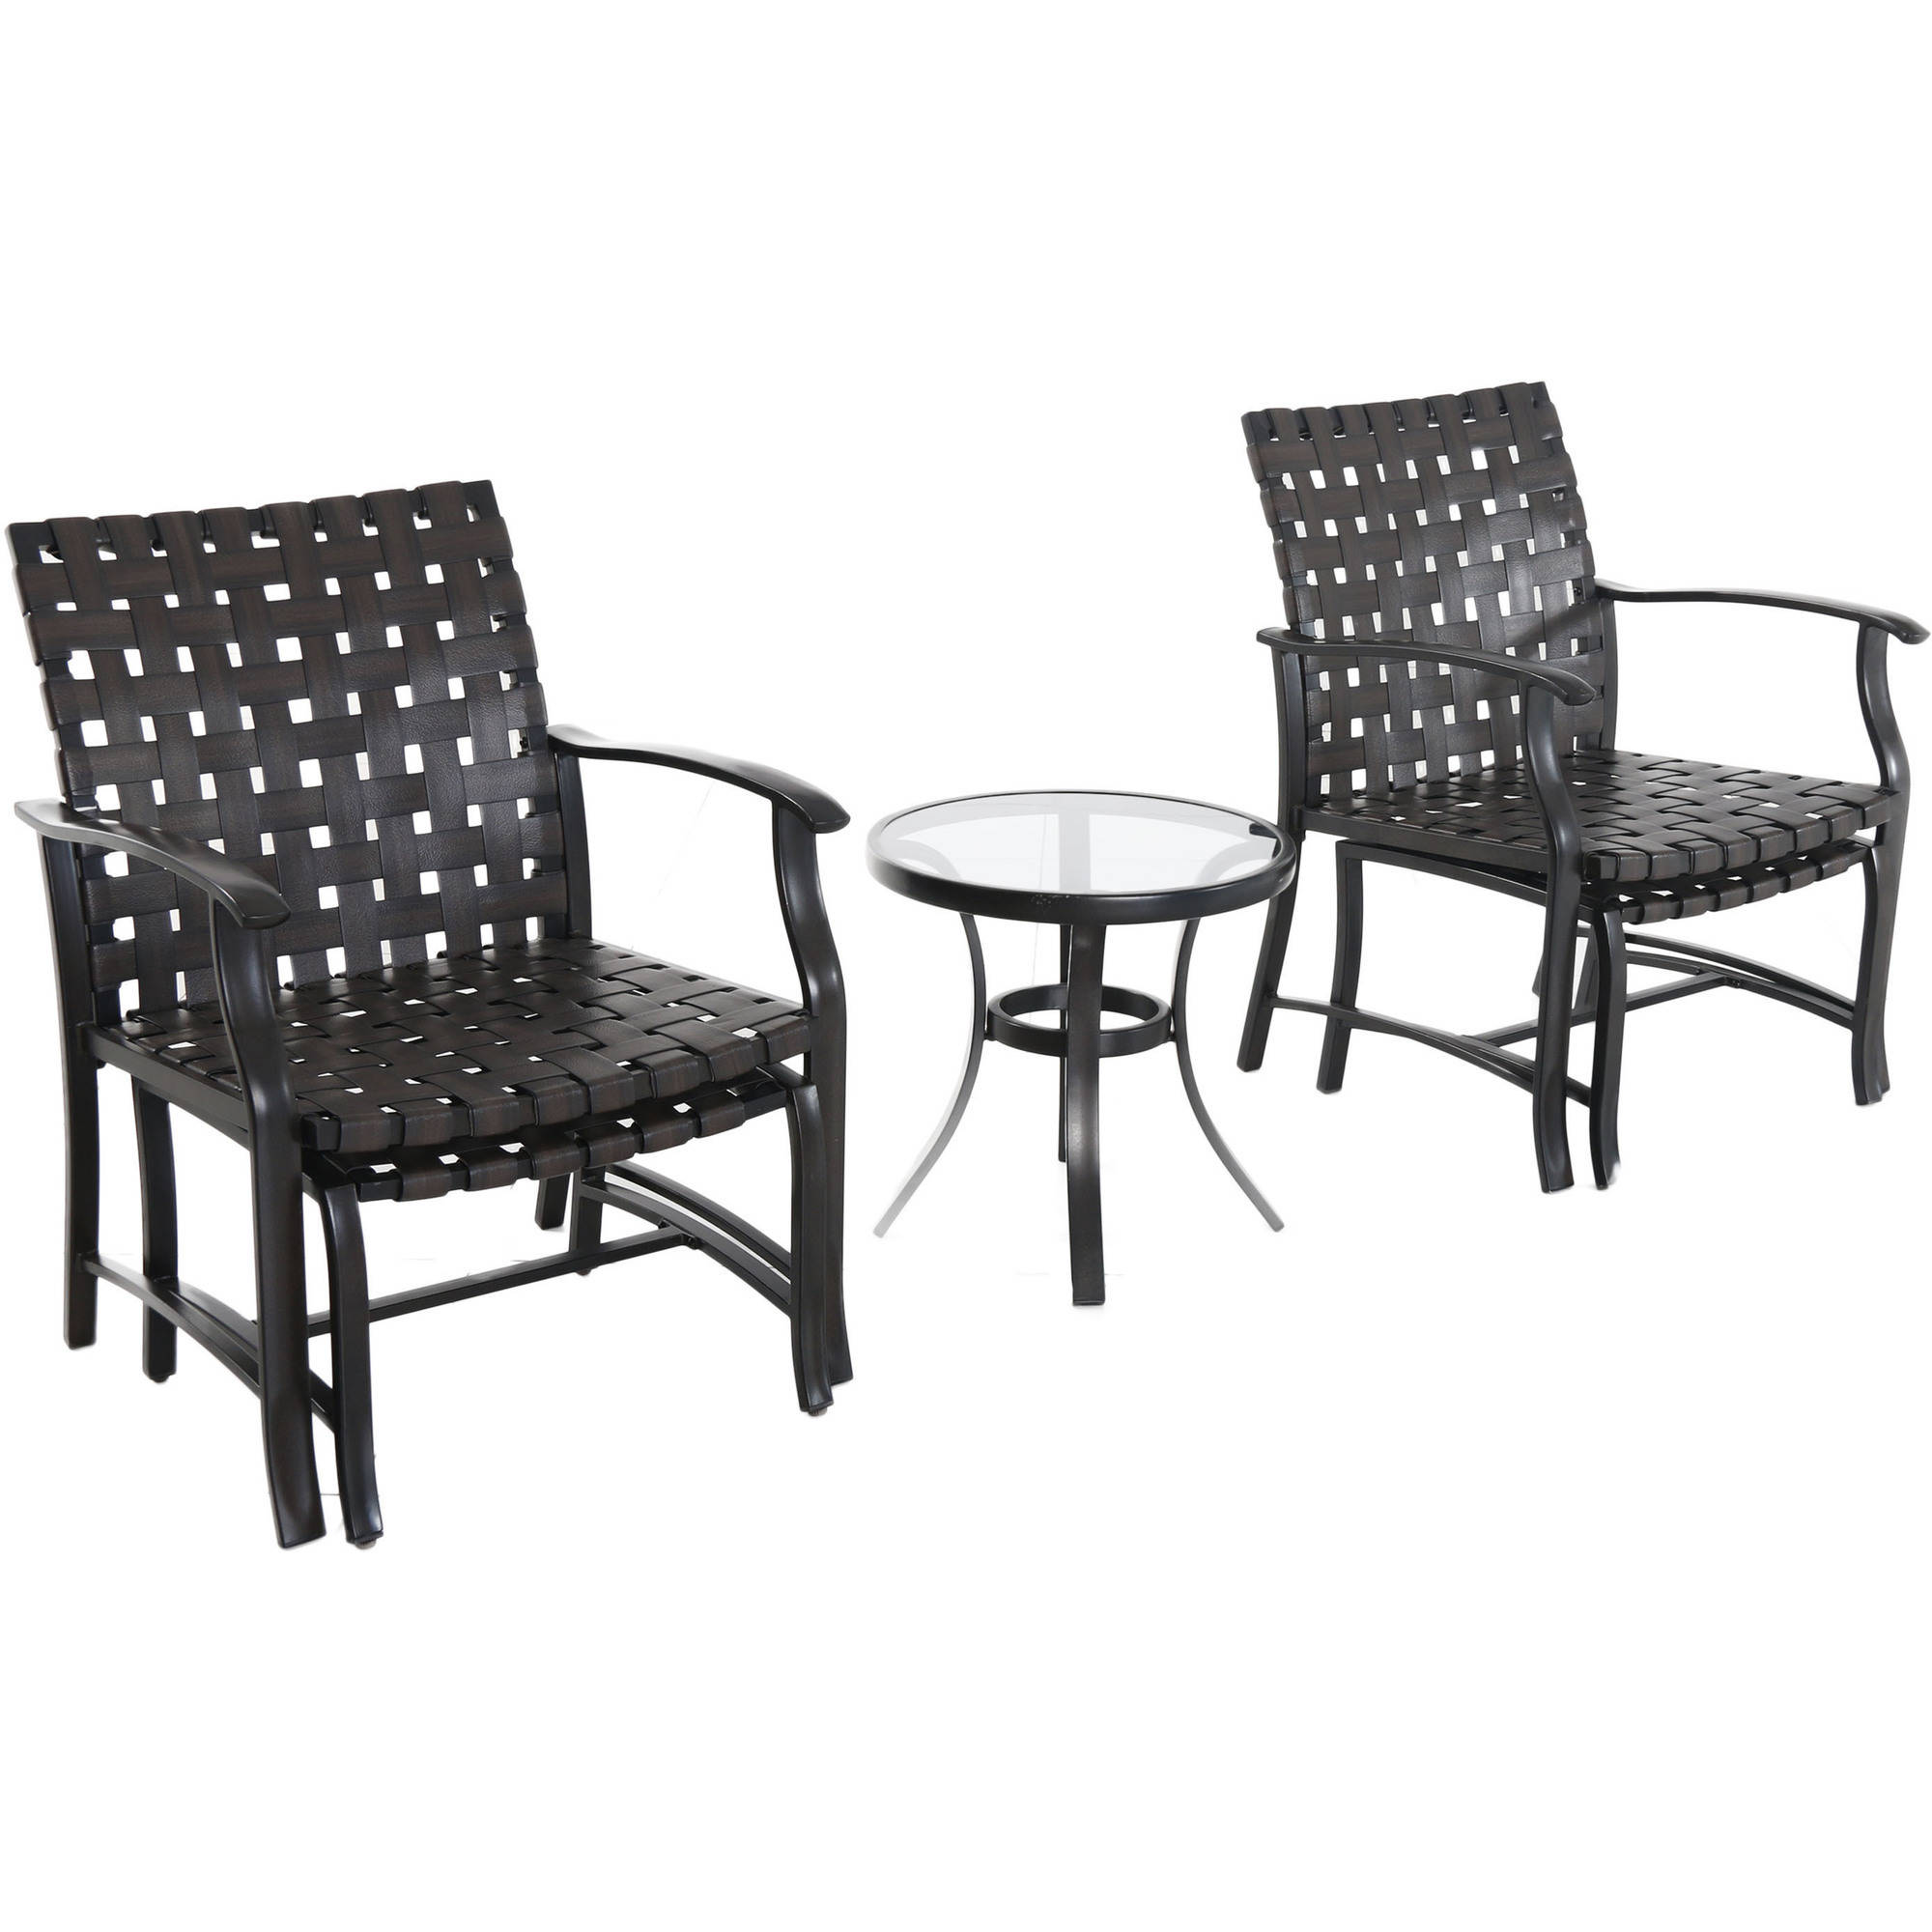 Mainstays Willow Valley 5-Piece Chat Set - image 2 of 8